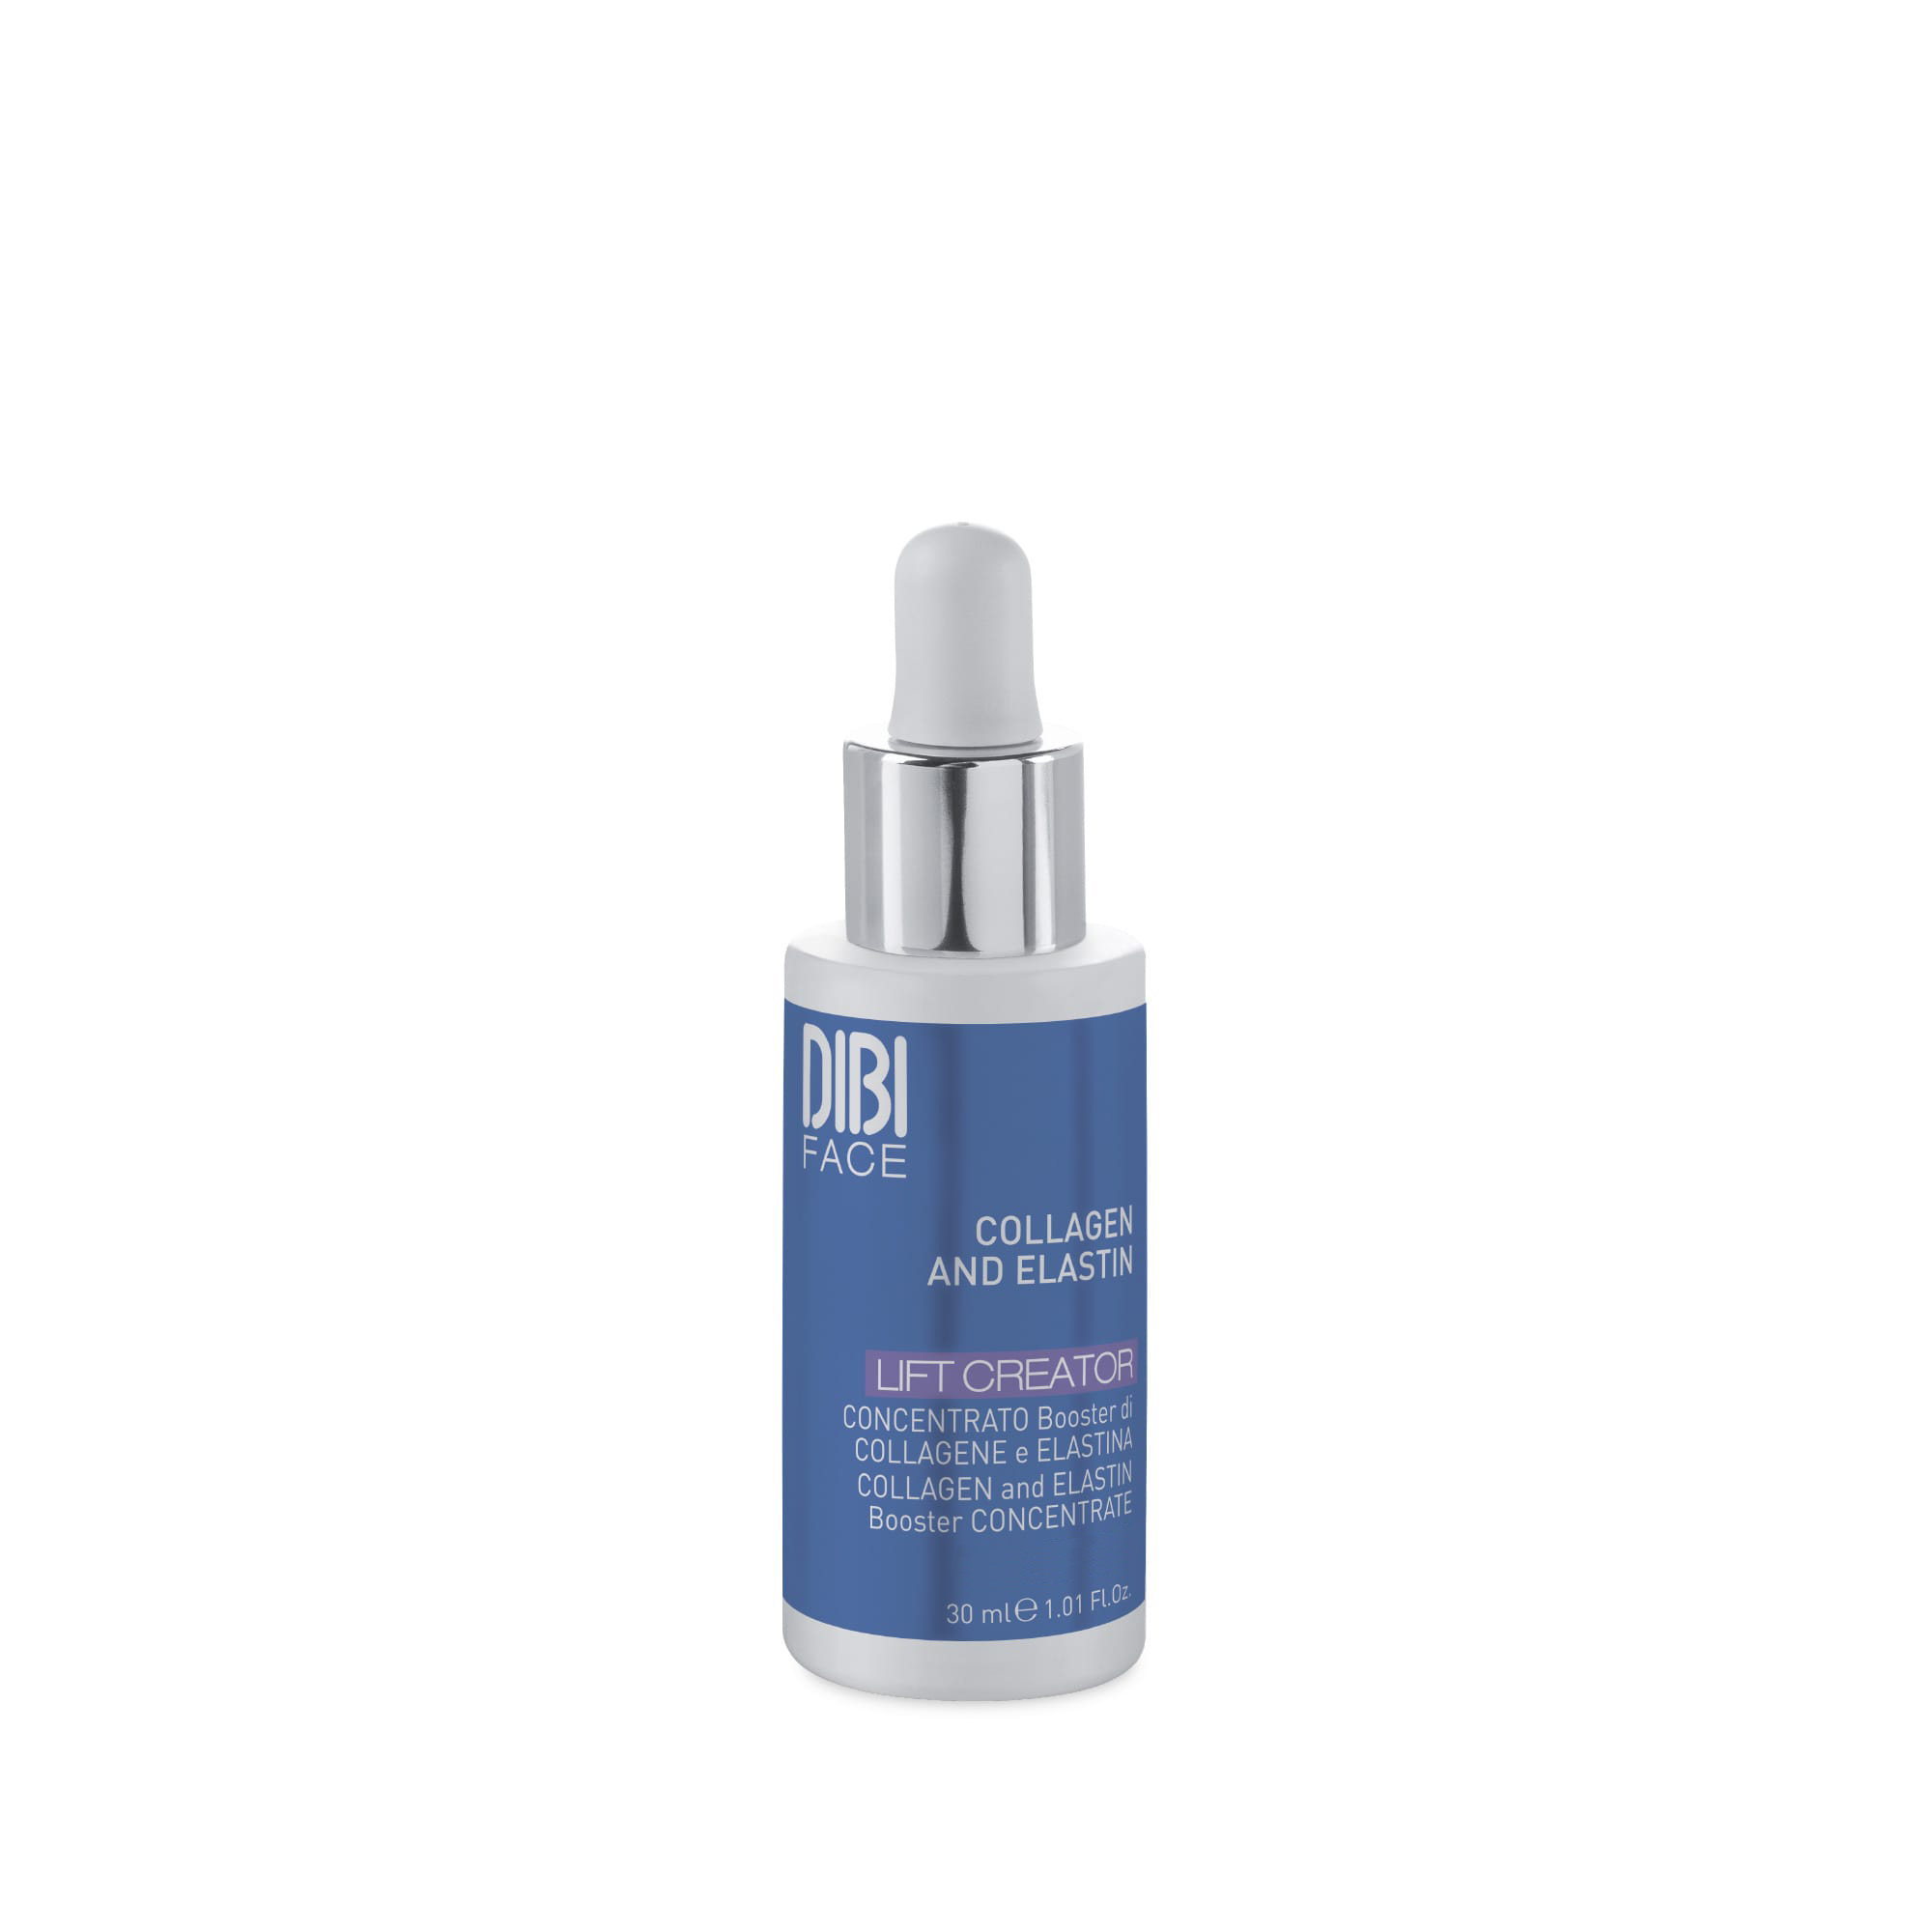 DIBI FACE LIFT CREATOR COLLAGEN and ELASTIN Booster CONCENTRATE